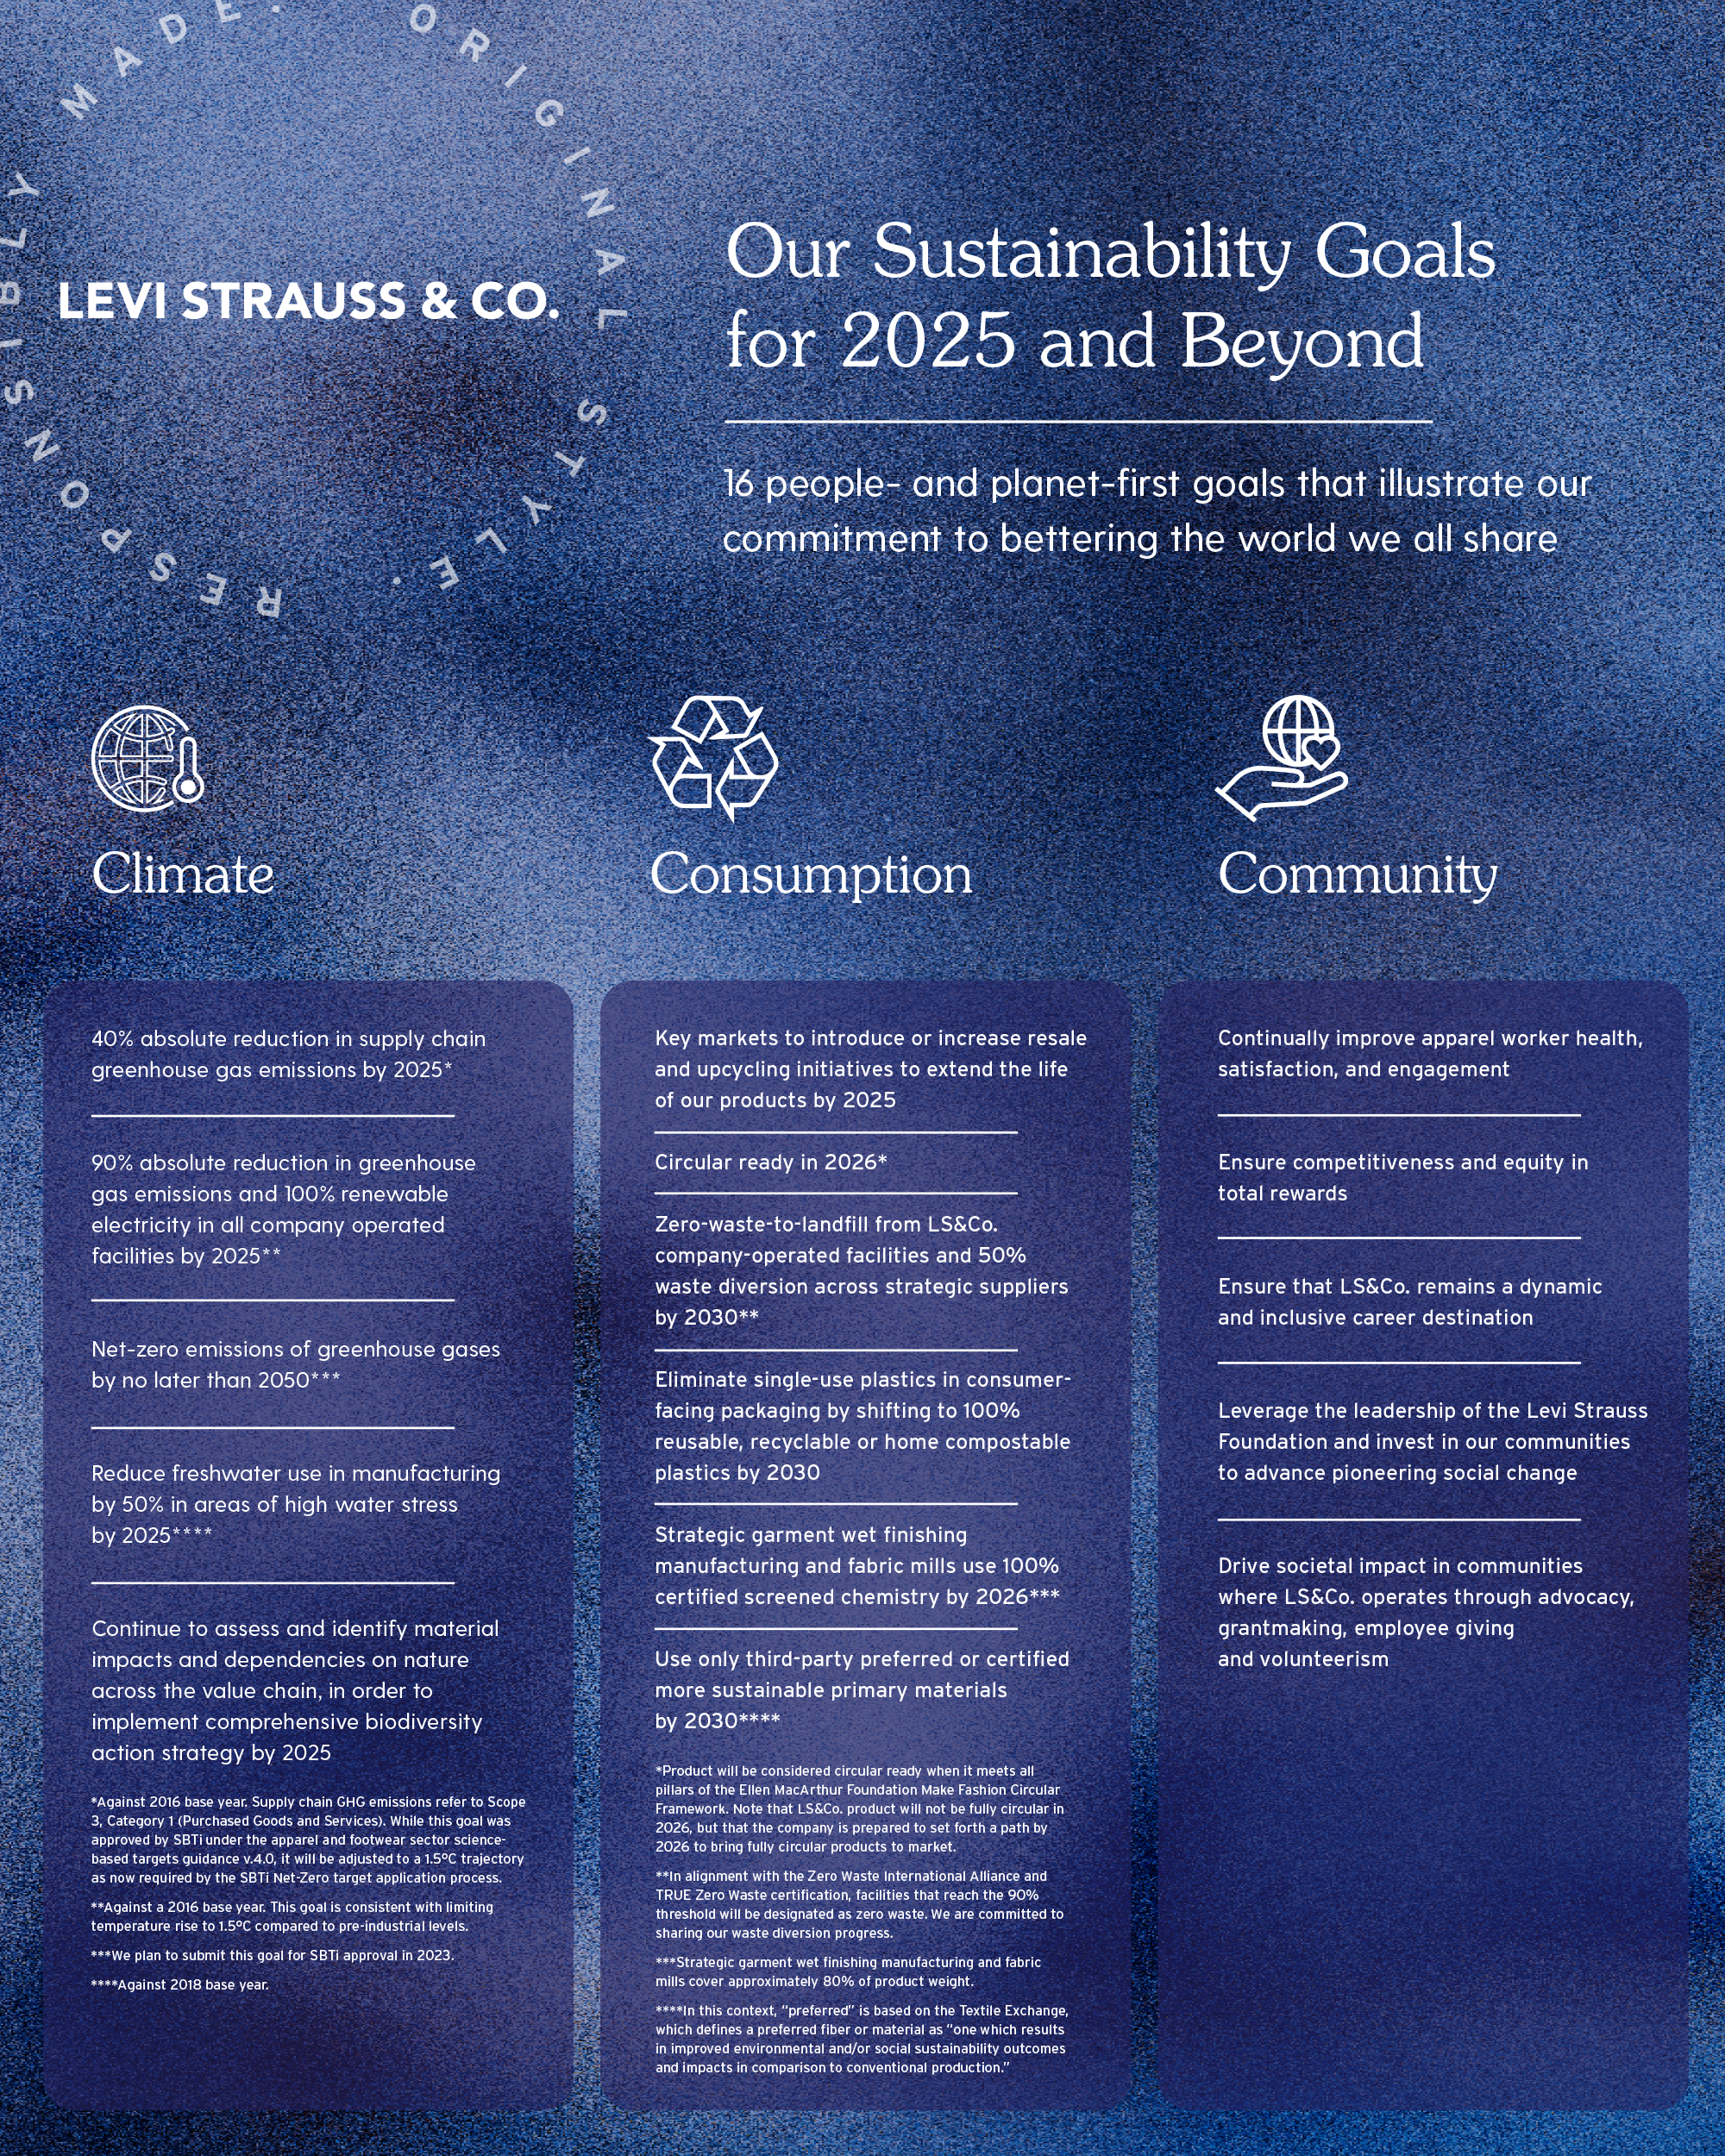 Our Sustainability Strategy - Levi Strauss & Co : Levi Strauss & Co